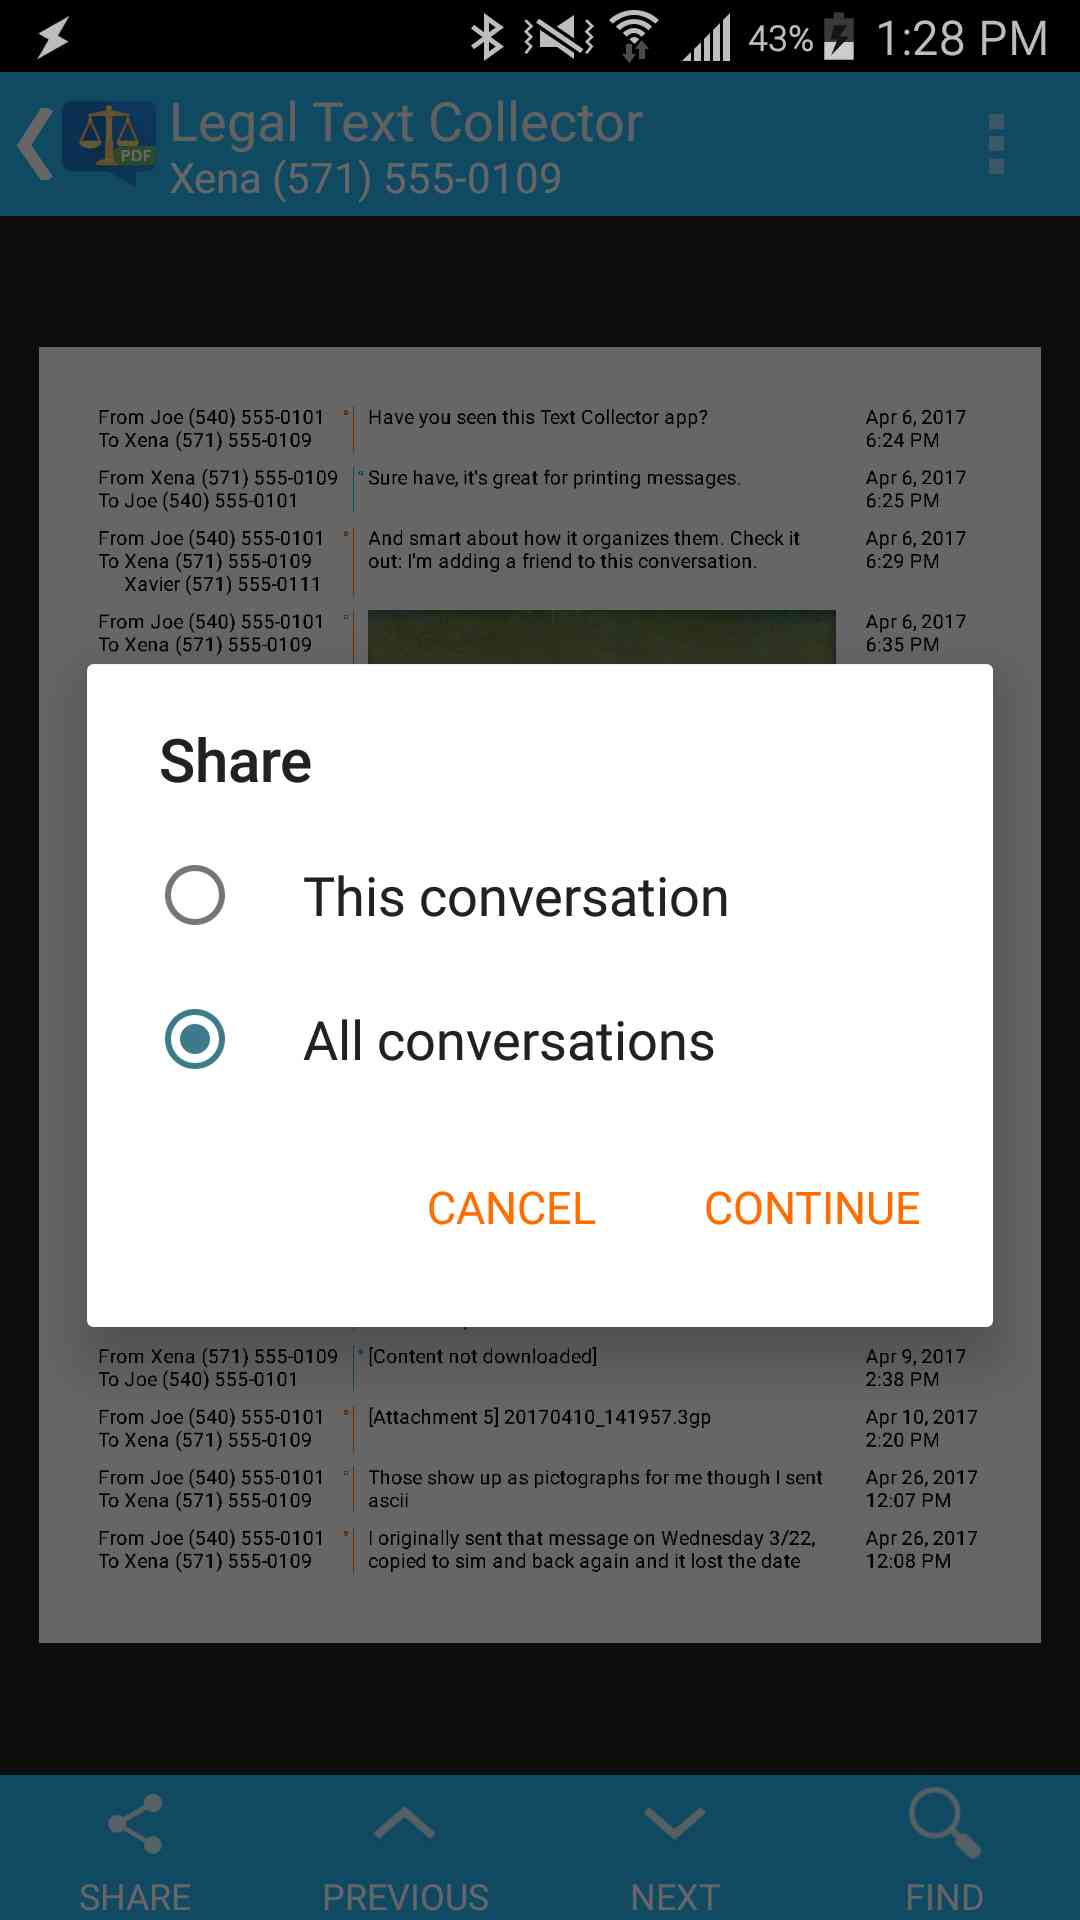 Option to choose "this conversation" or "all conversations"